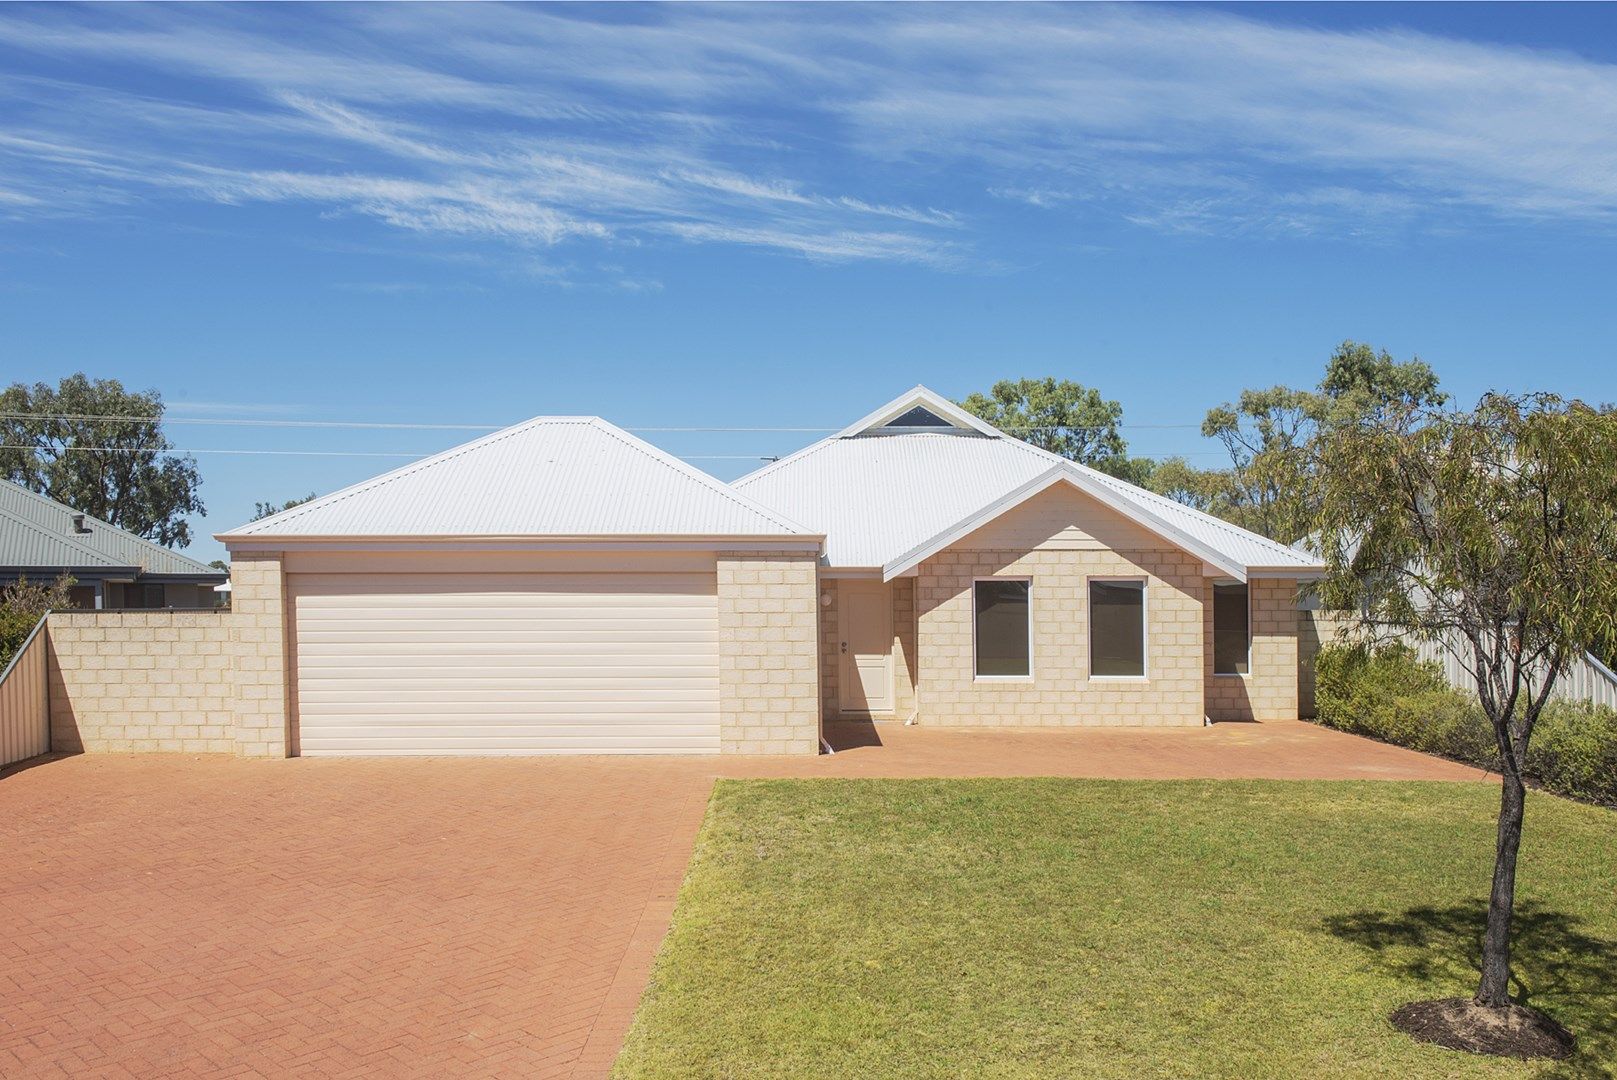 26 Spindrift Cove, Quindalup WA 6281, Image 0